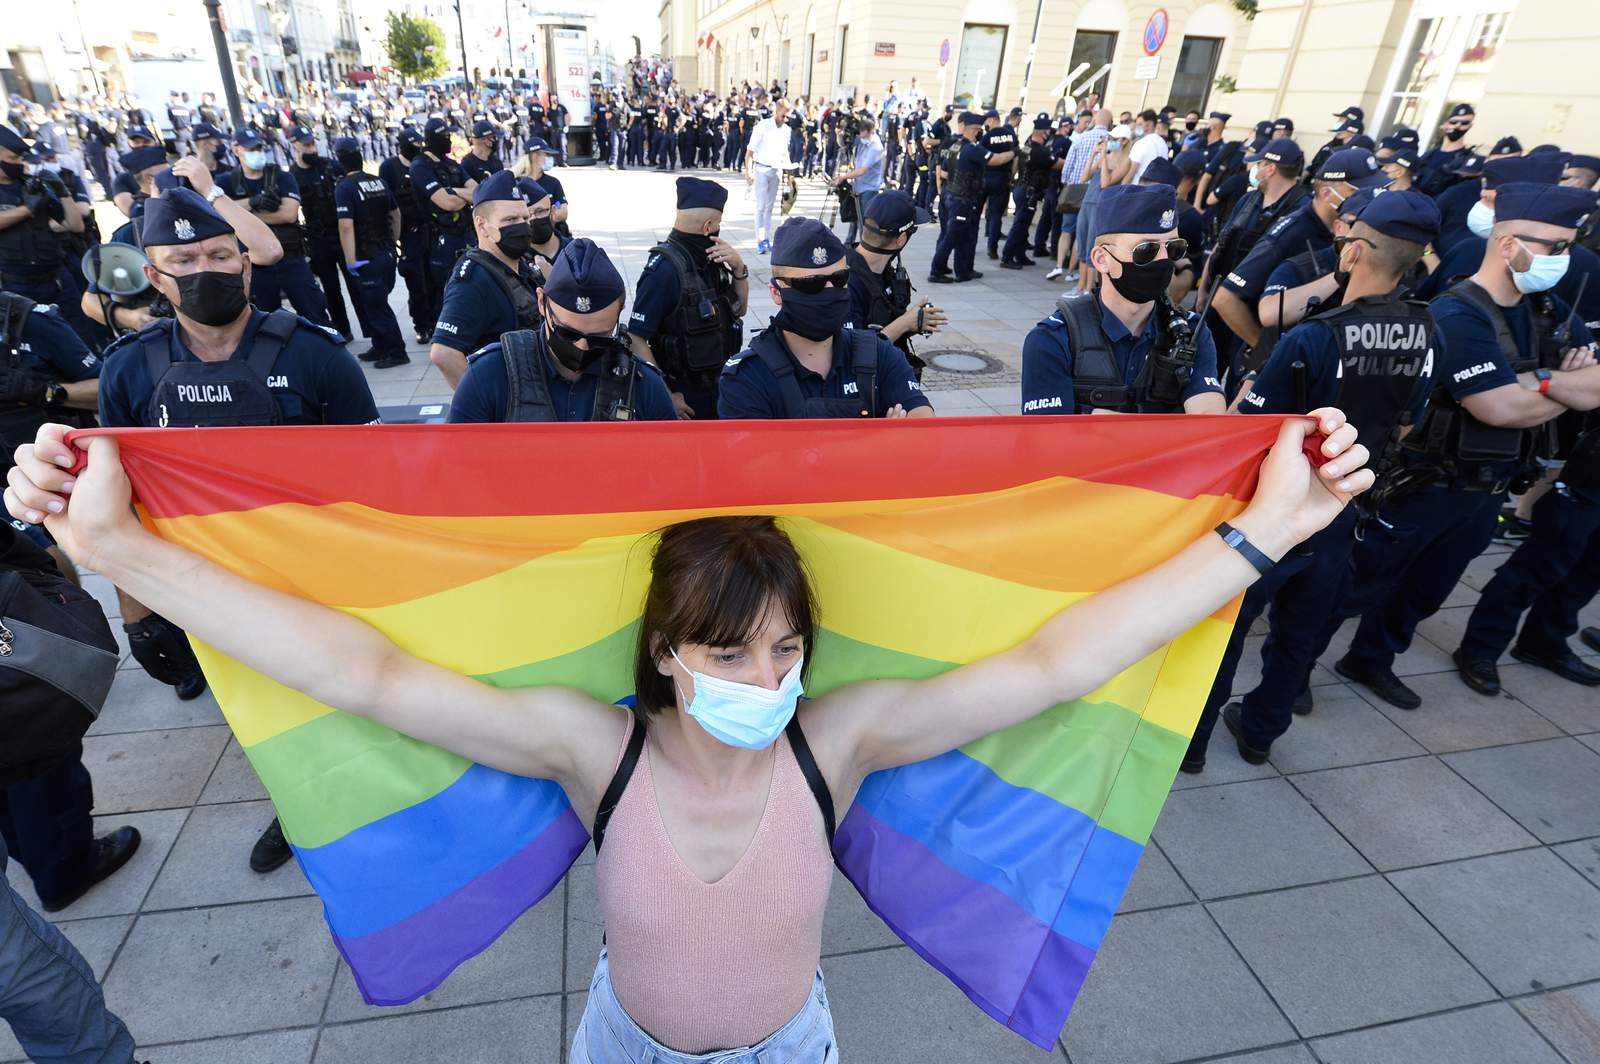 Artists, academics defend LGBT rights in Poland